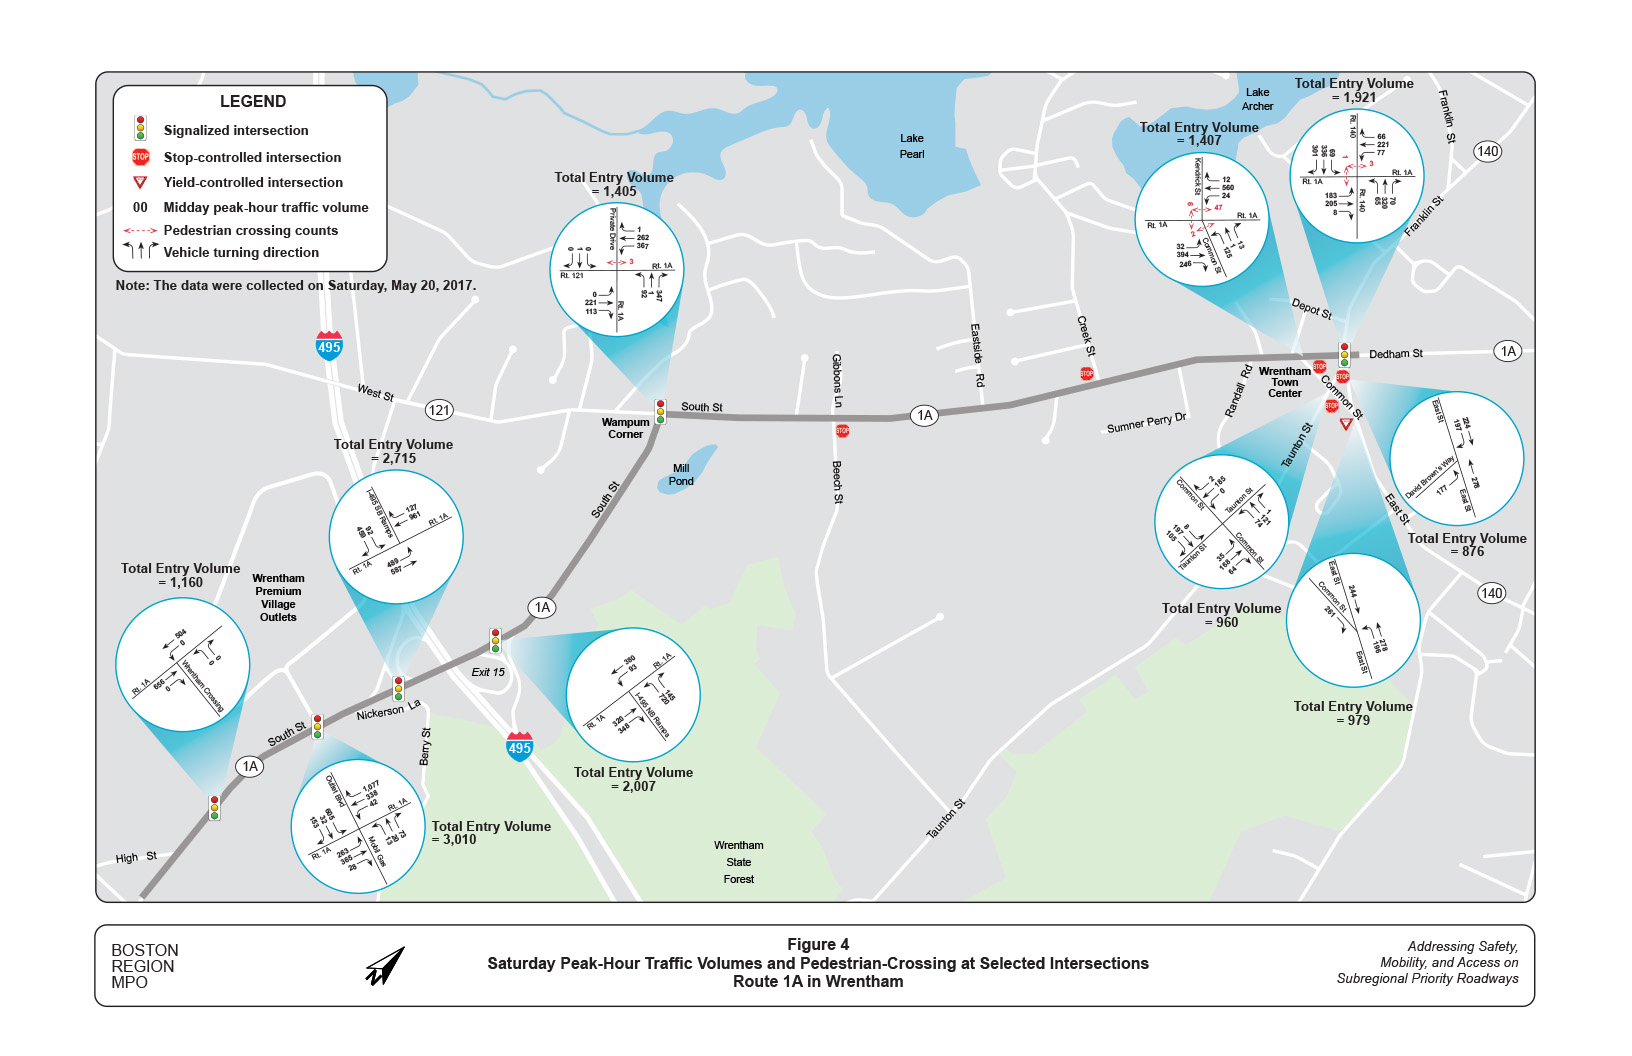 Figure 4 is a map with diagrams showing Saturday peak-hour traffic and pedestrian volumes at selected intersections on Route 1A in Wrentham.